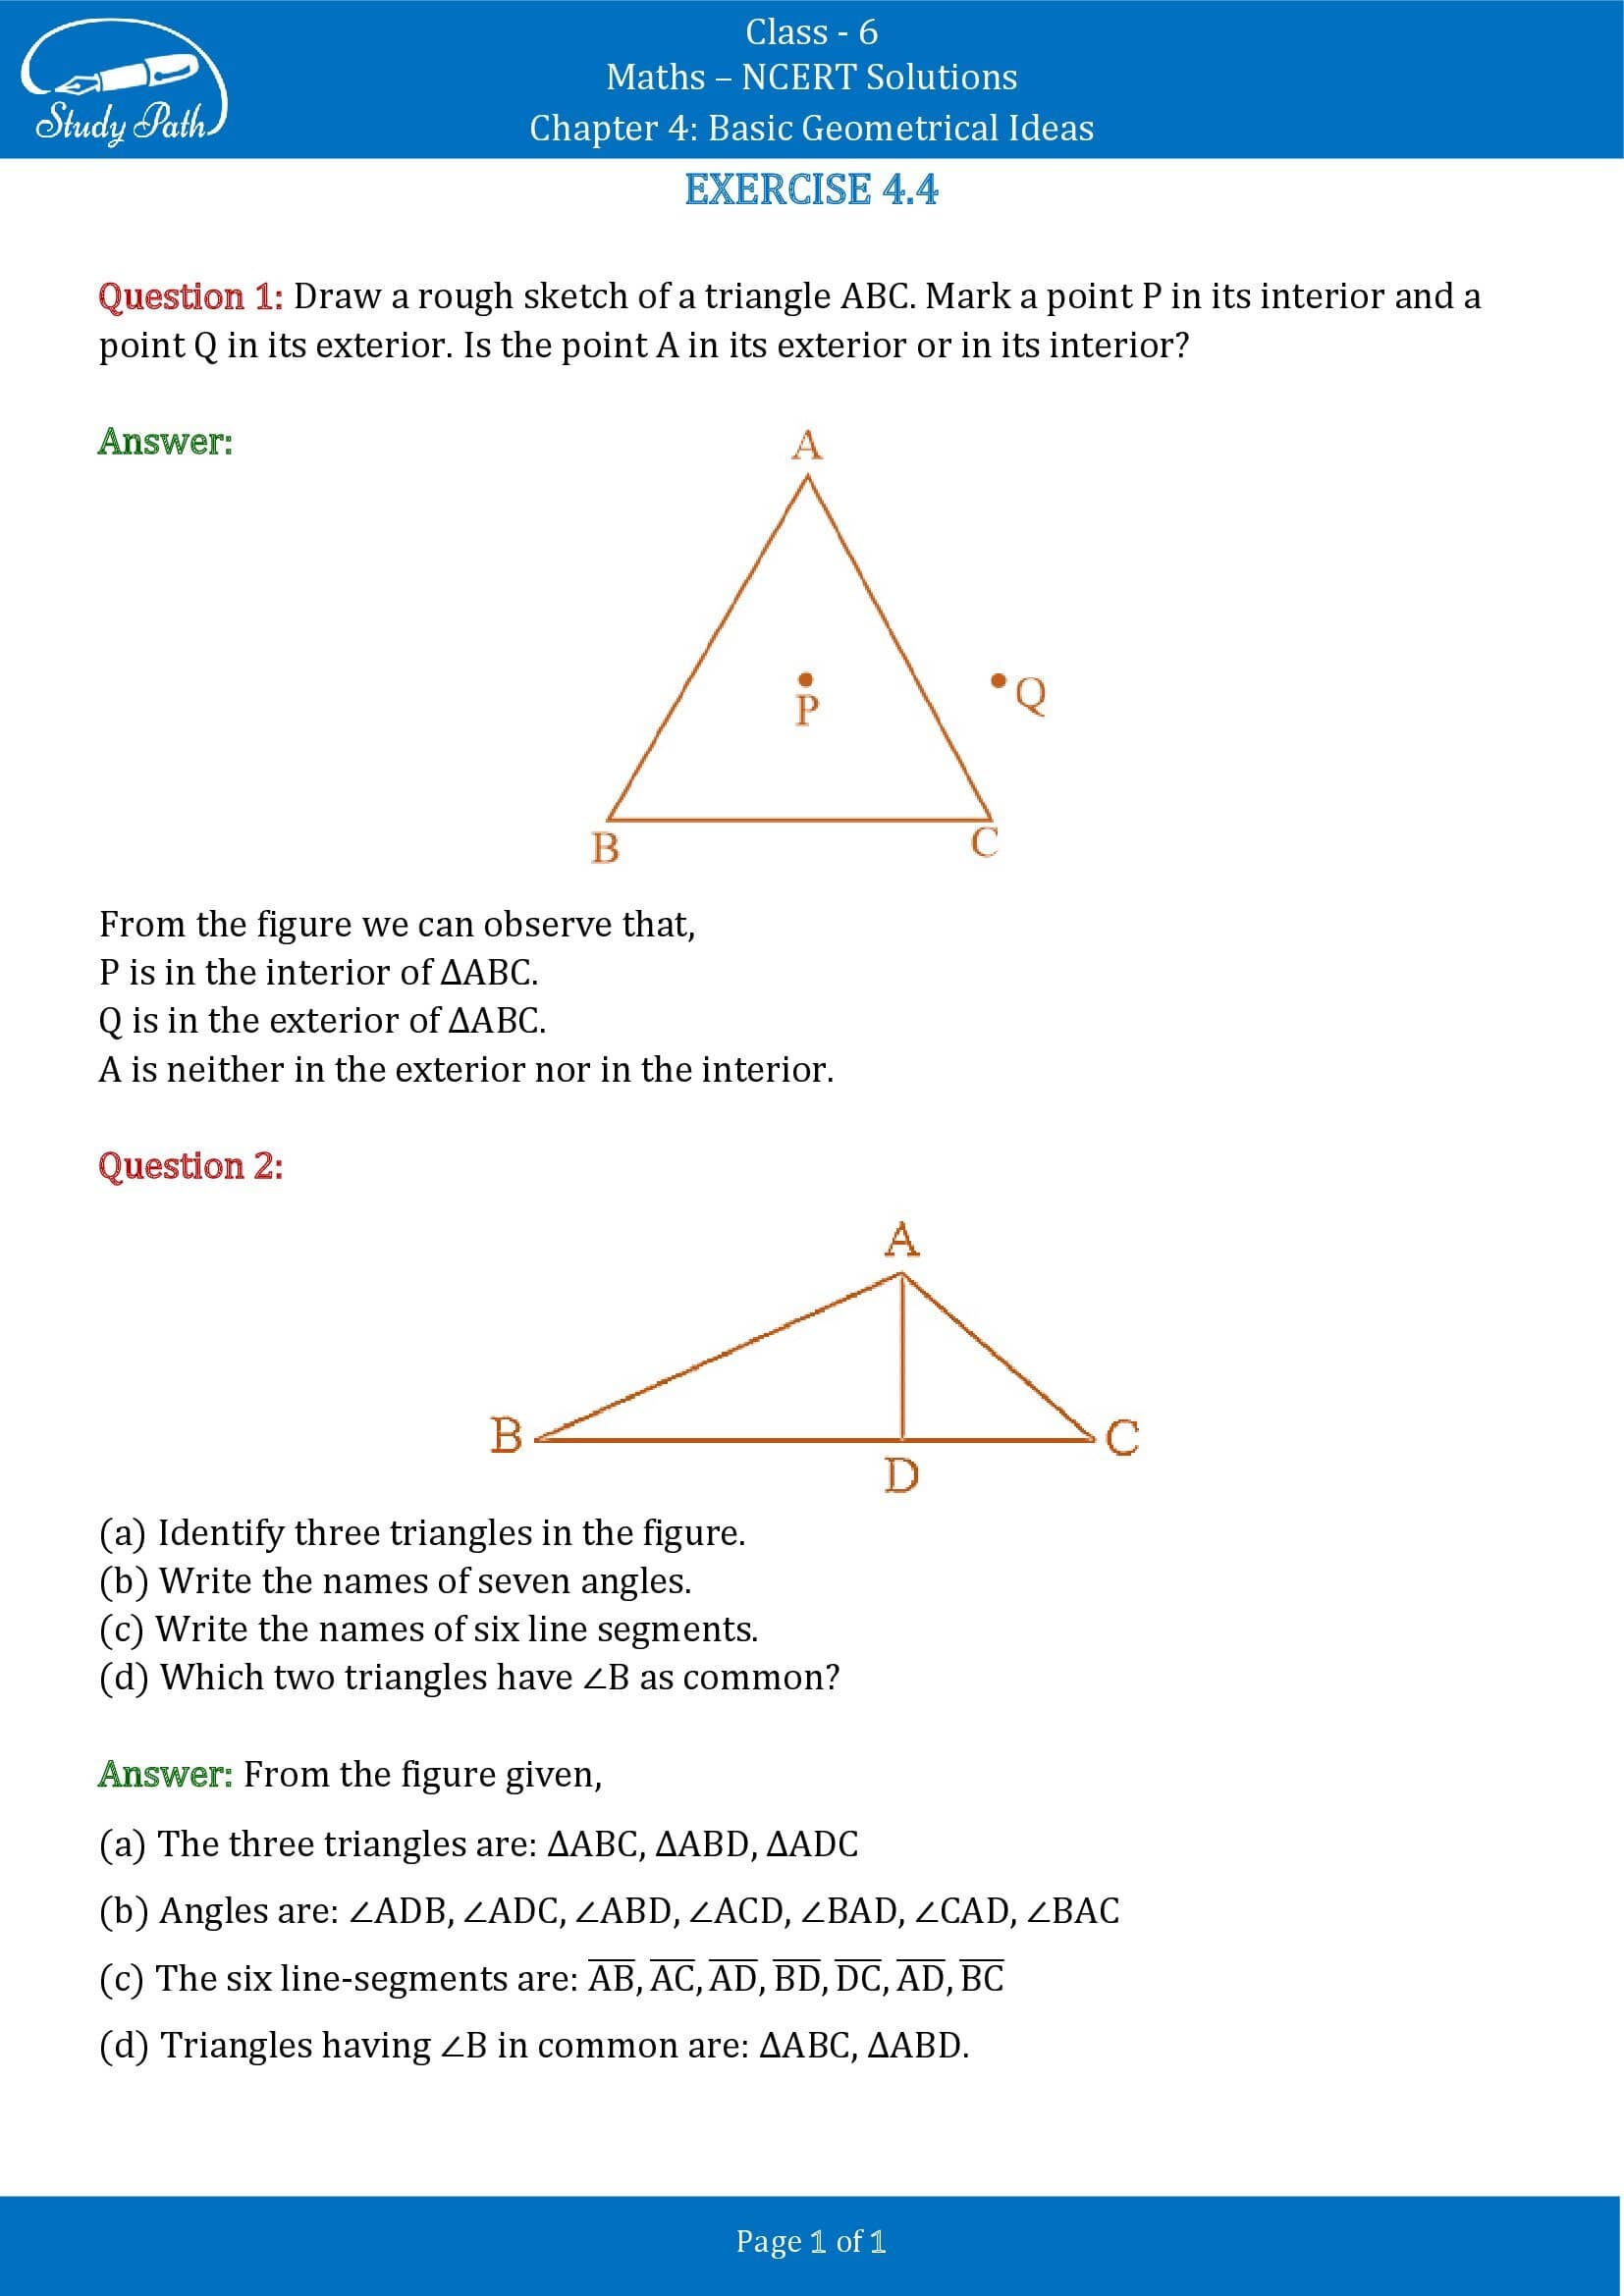 NCERT Solutions for Class 6 Maths Chapter 4 Basic Geometrical Ideas Exercise 4.4